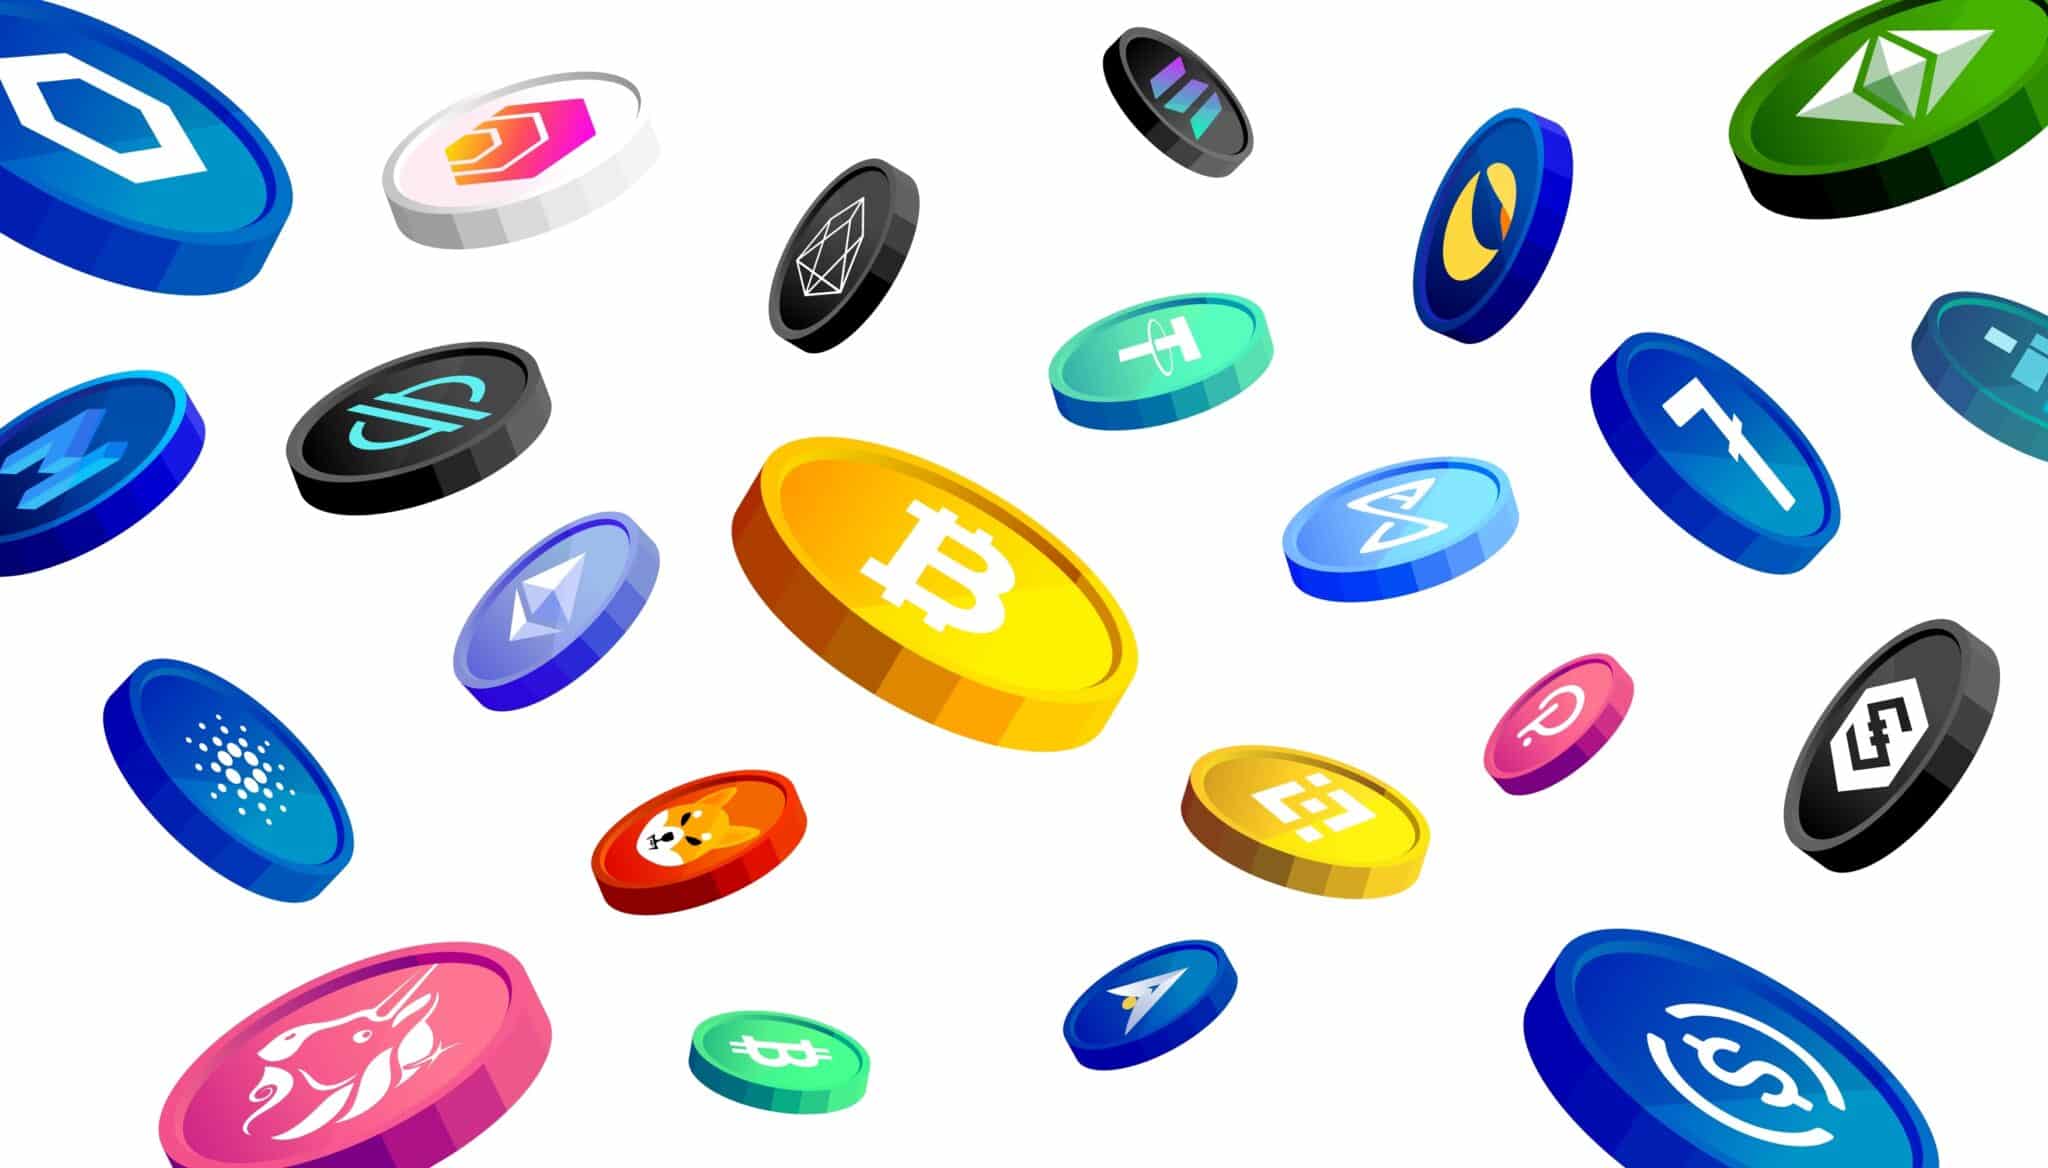 Cryptocurrencies floating in the air with a white background.